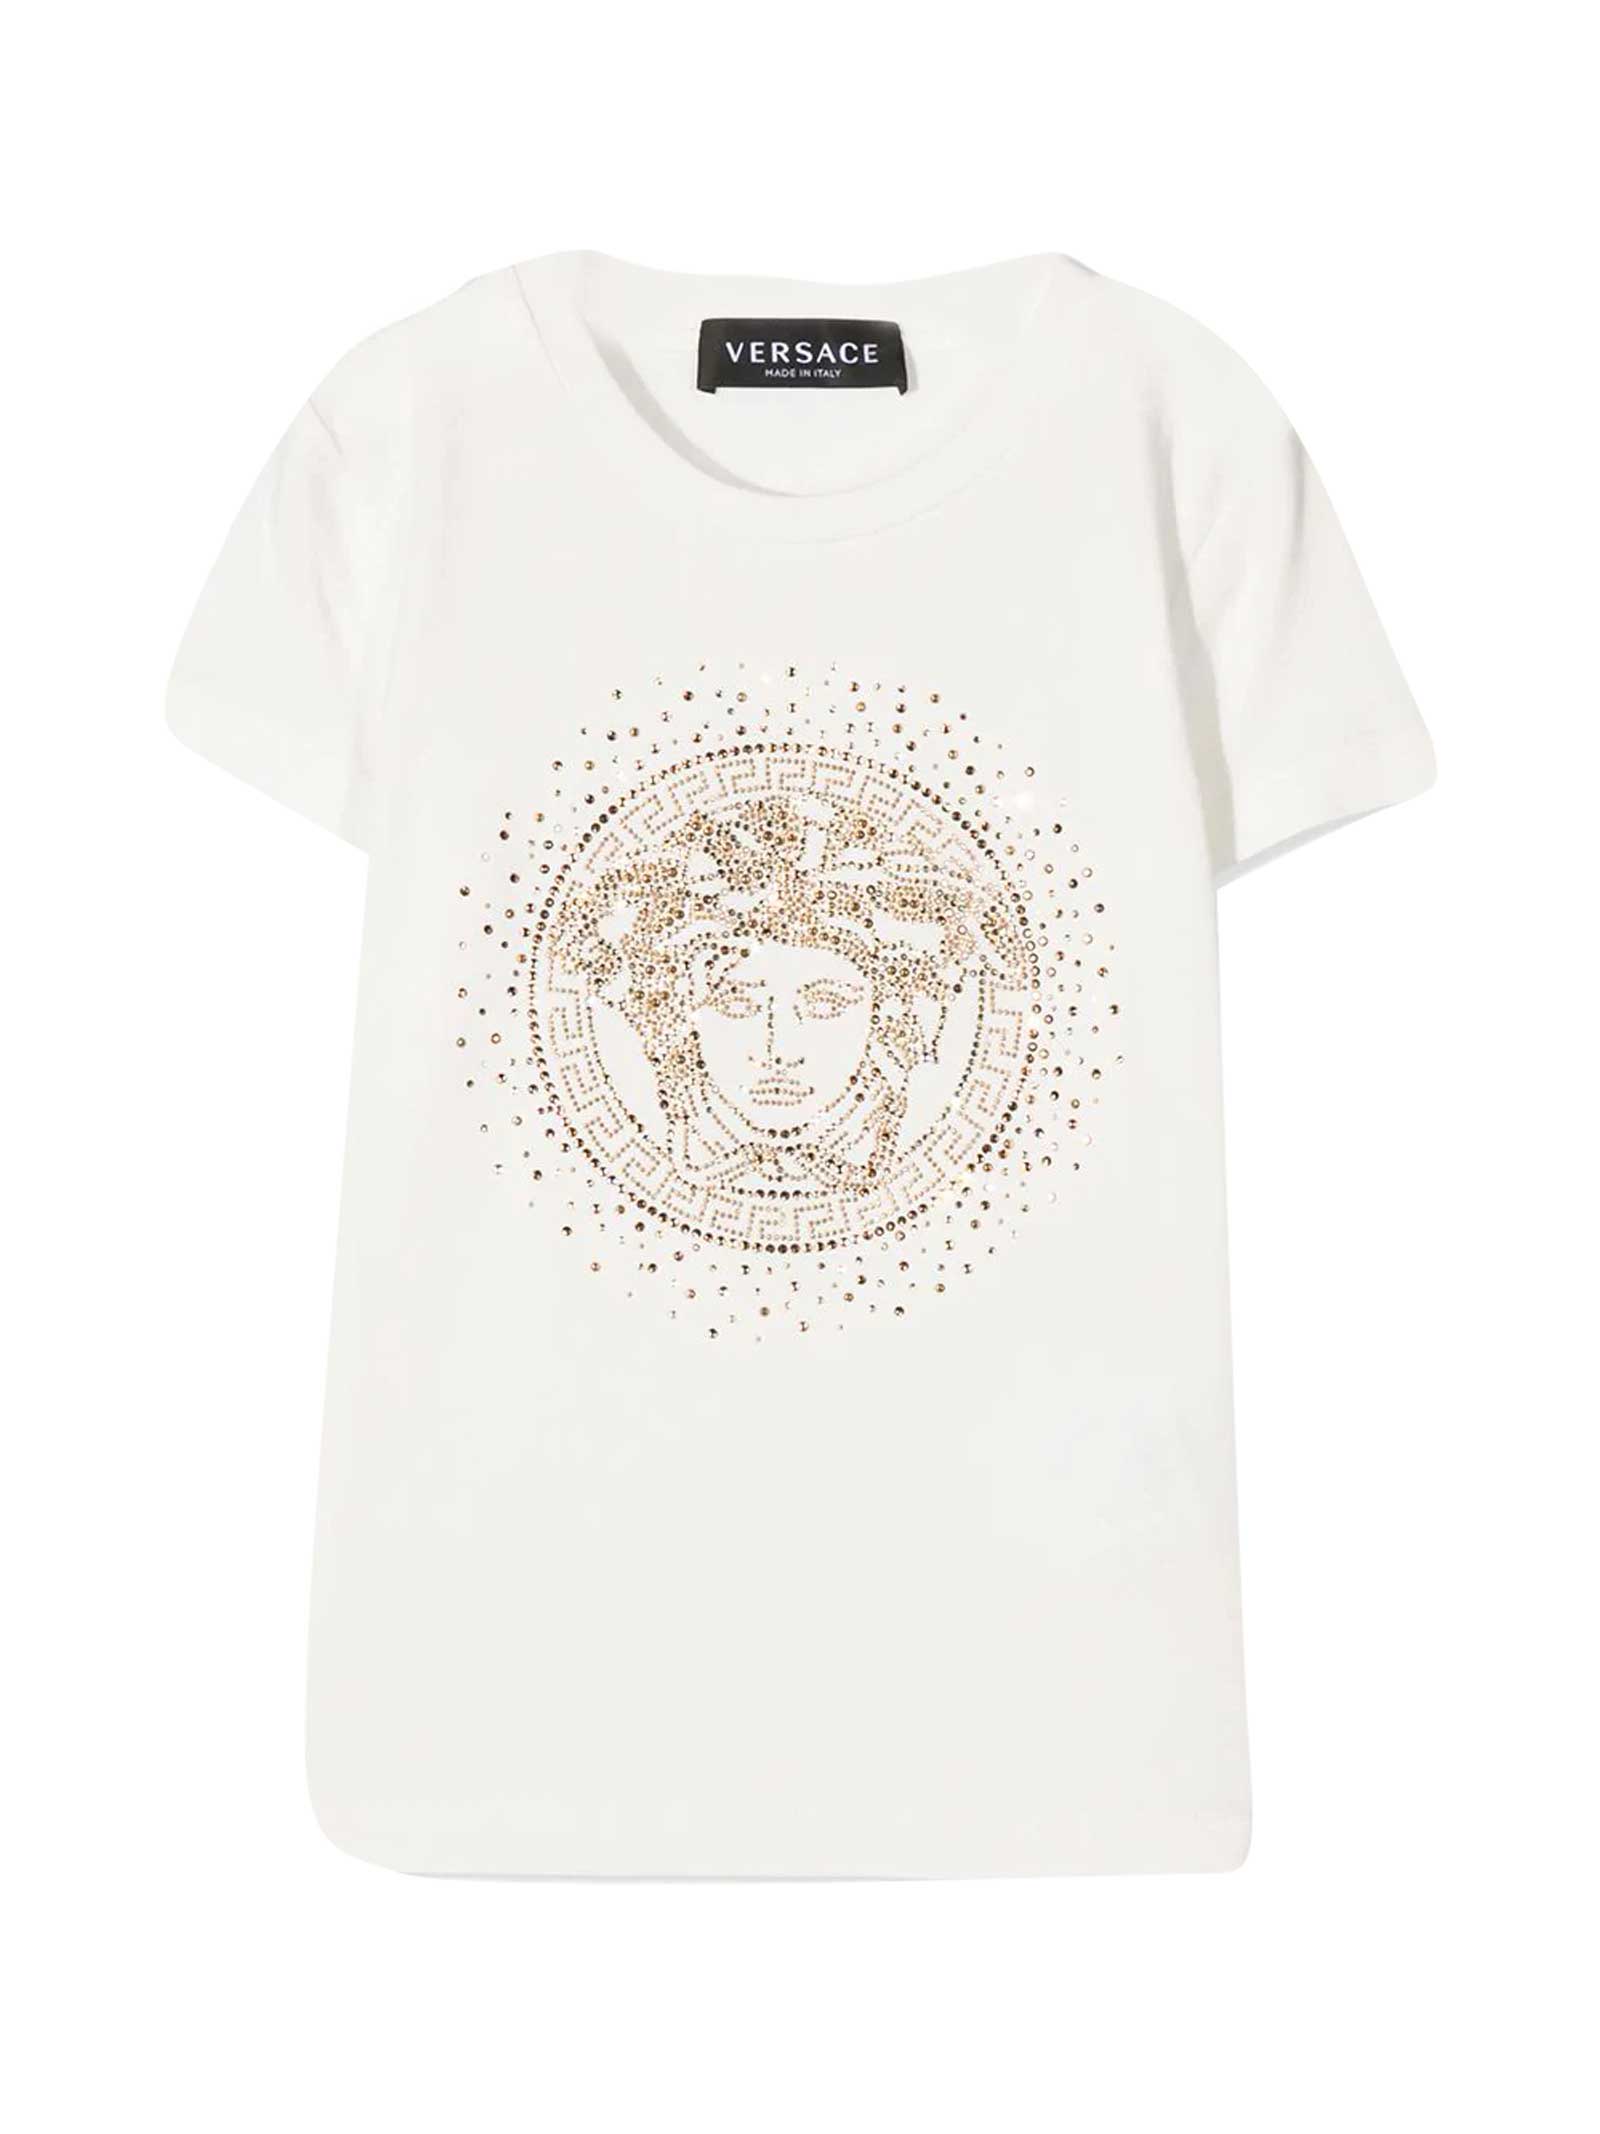 Versace White T-shirt With Golden Print Young